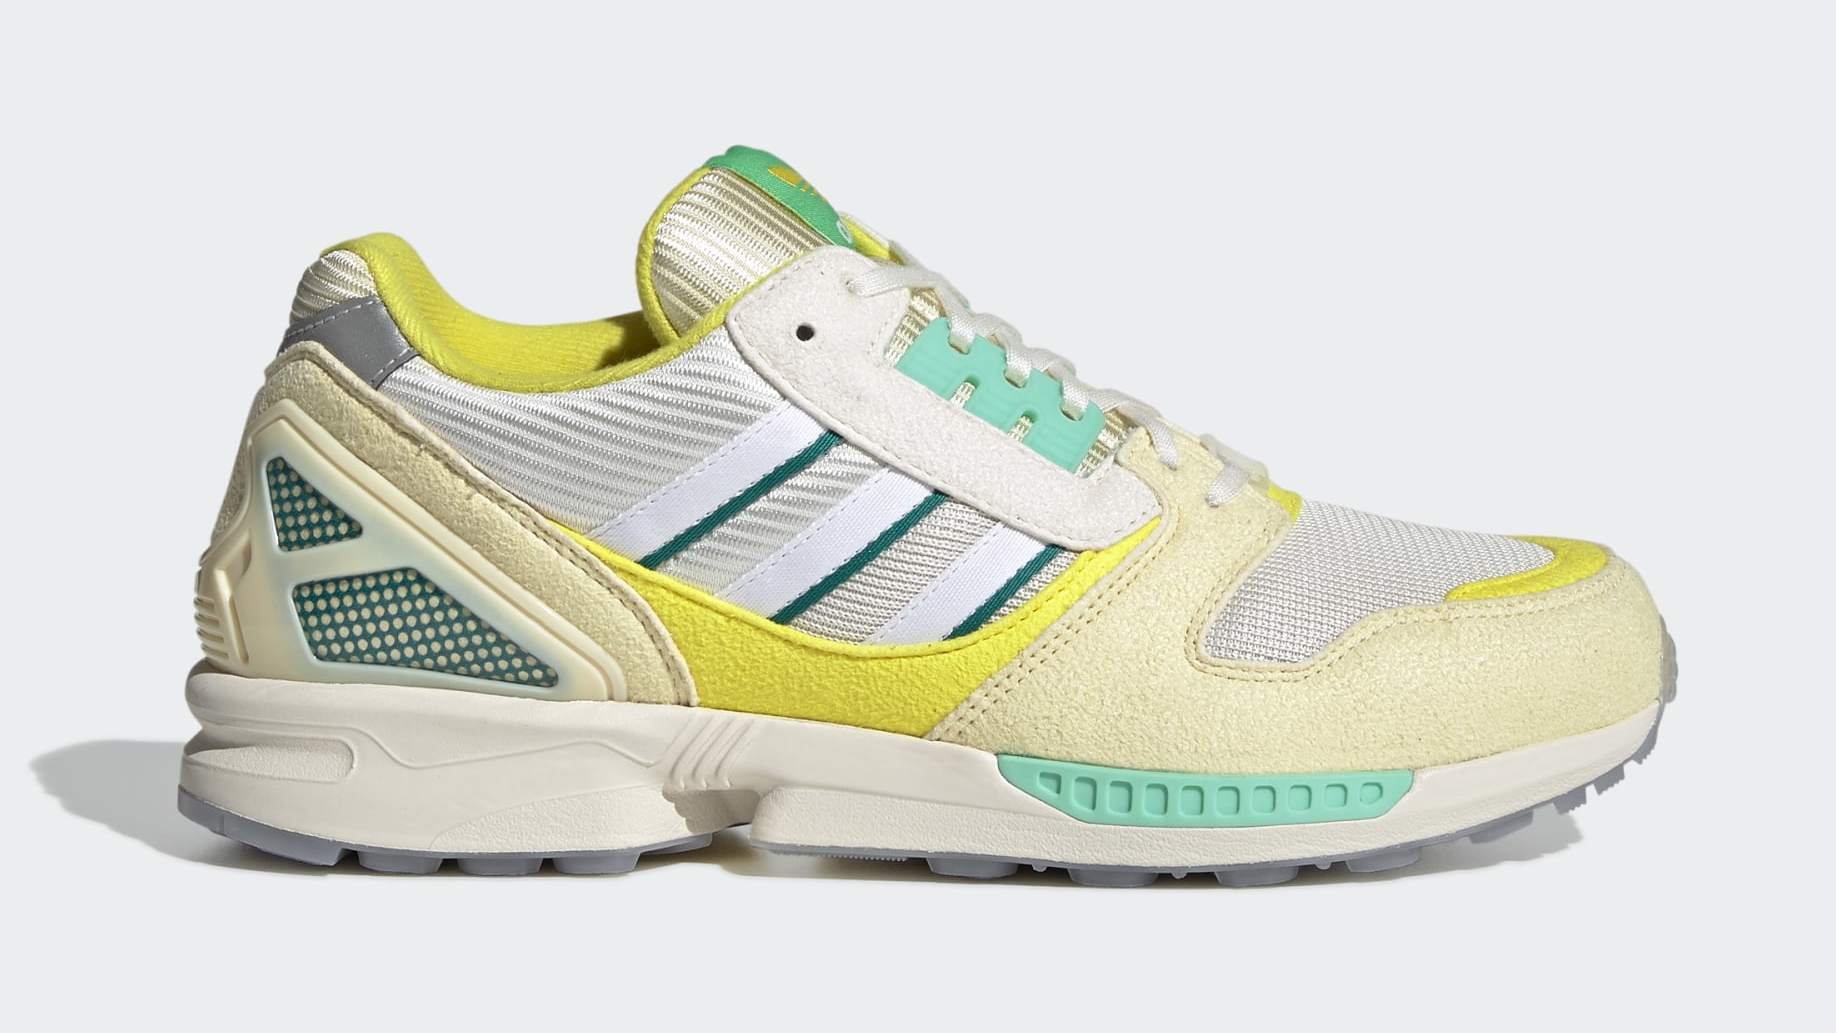 Summer-Themed Adidas ZX 8000 Is Releasing in the Middle of Winter 